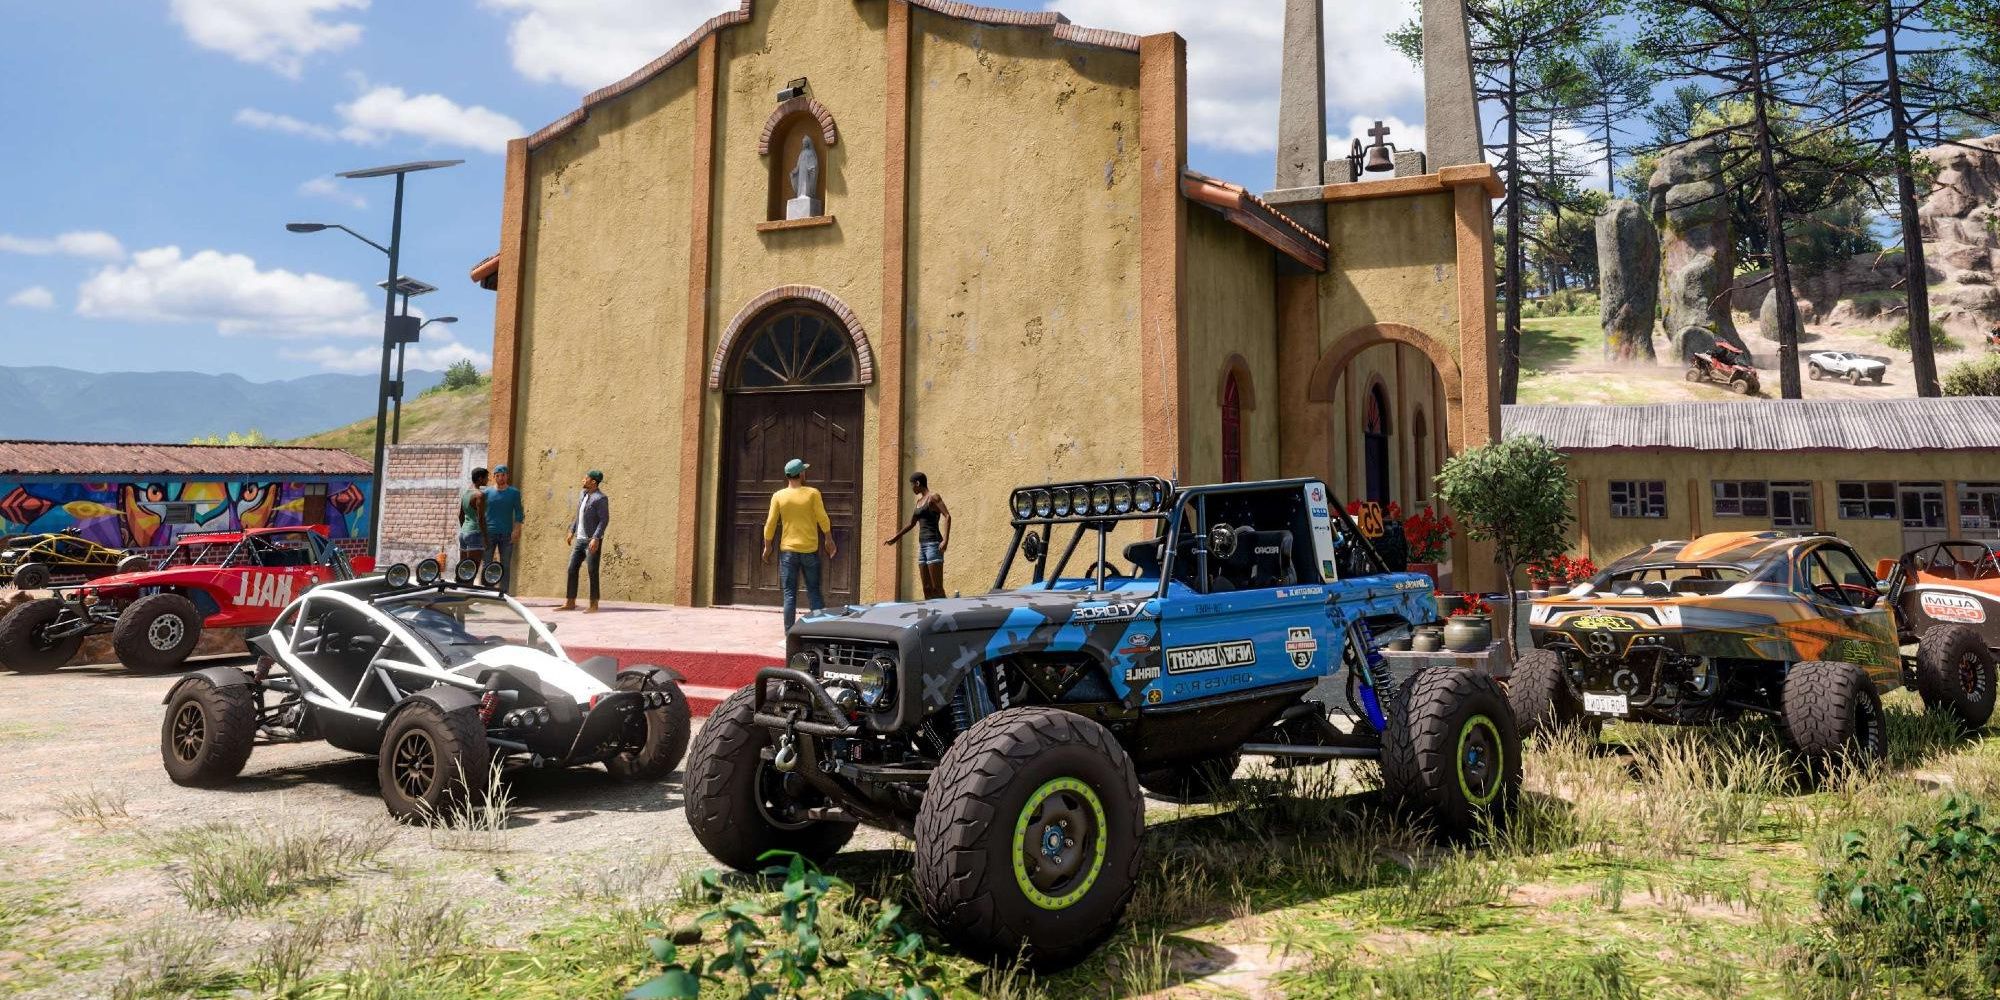 A group of people are hanging out in front of a church with their collection of cars parked out front in Forza Horizon 5